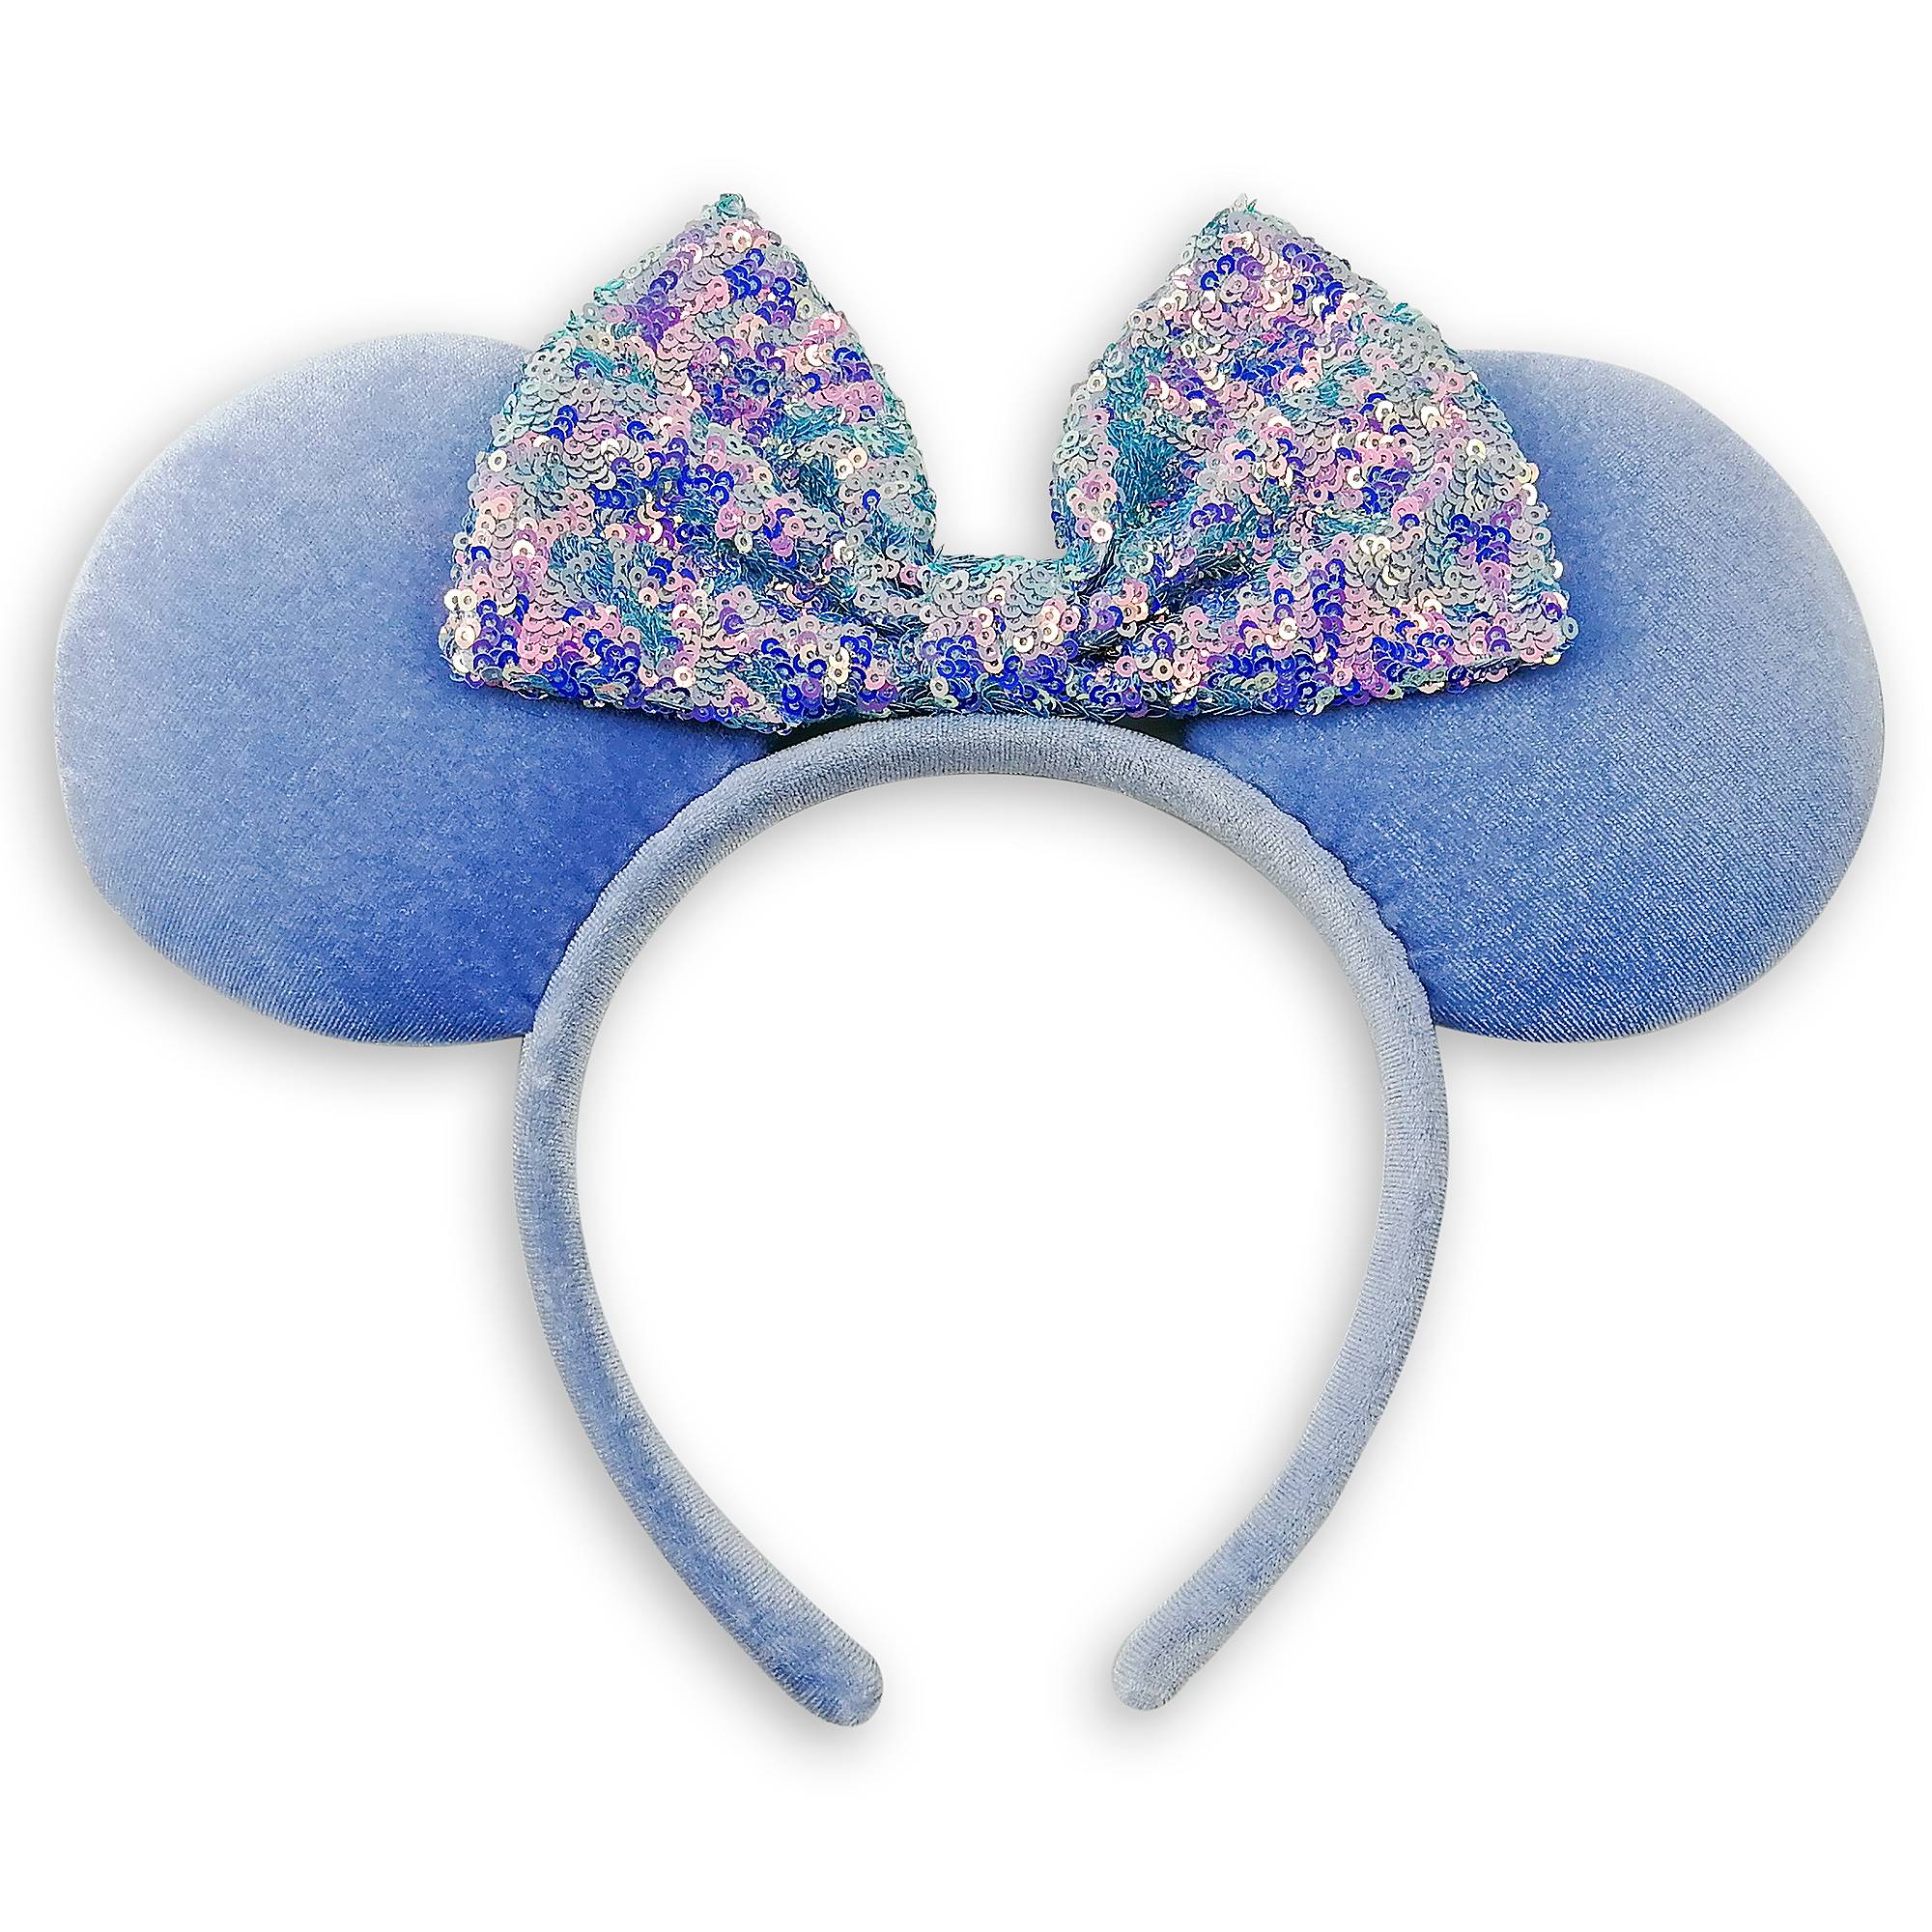 Minnie Mouse Ear Headband with Sequined Bow – Cornflower Blue image